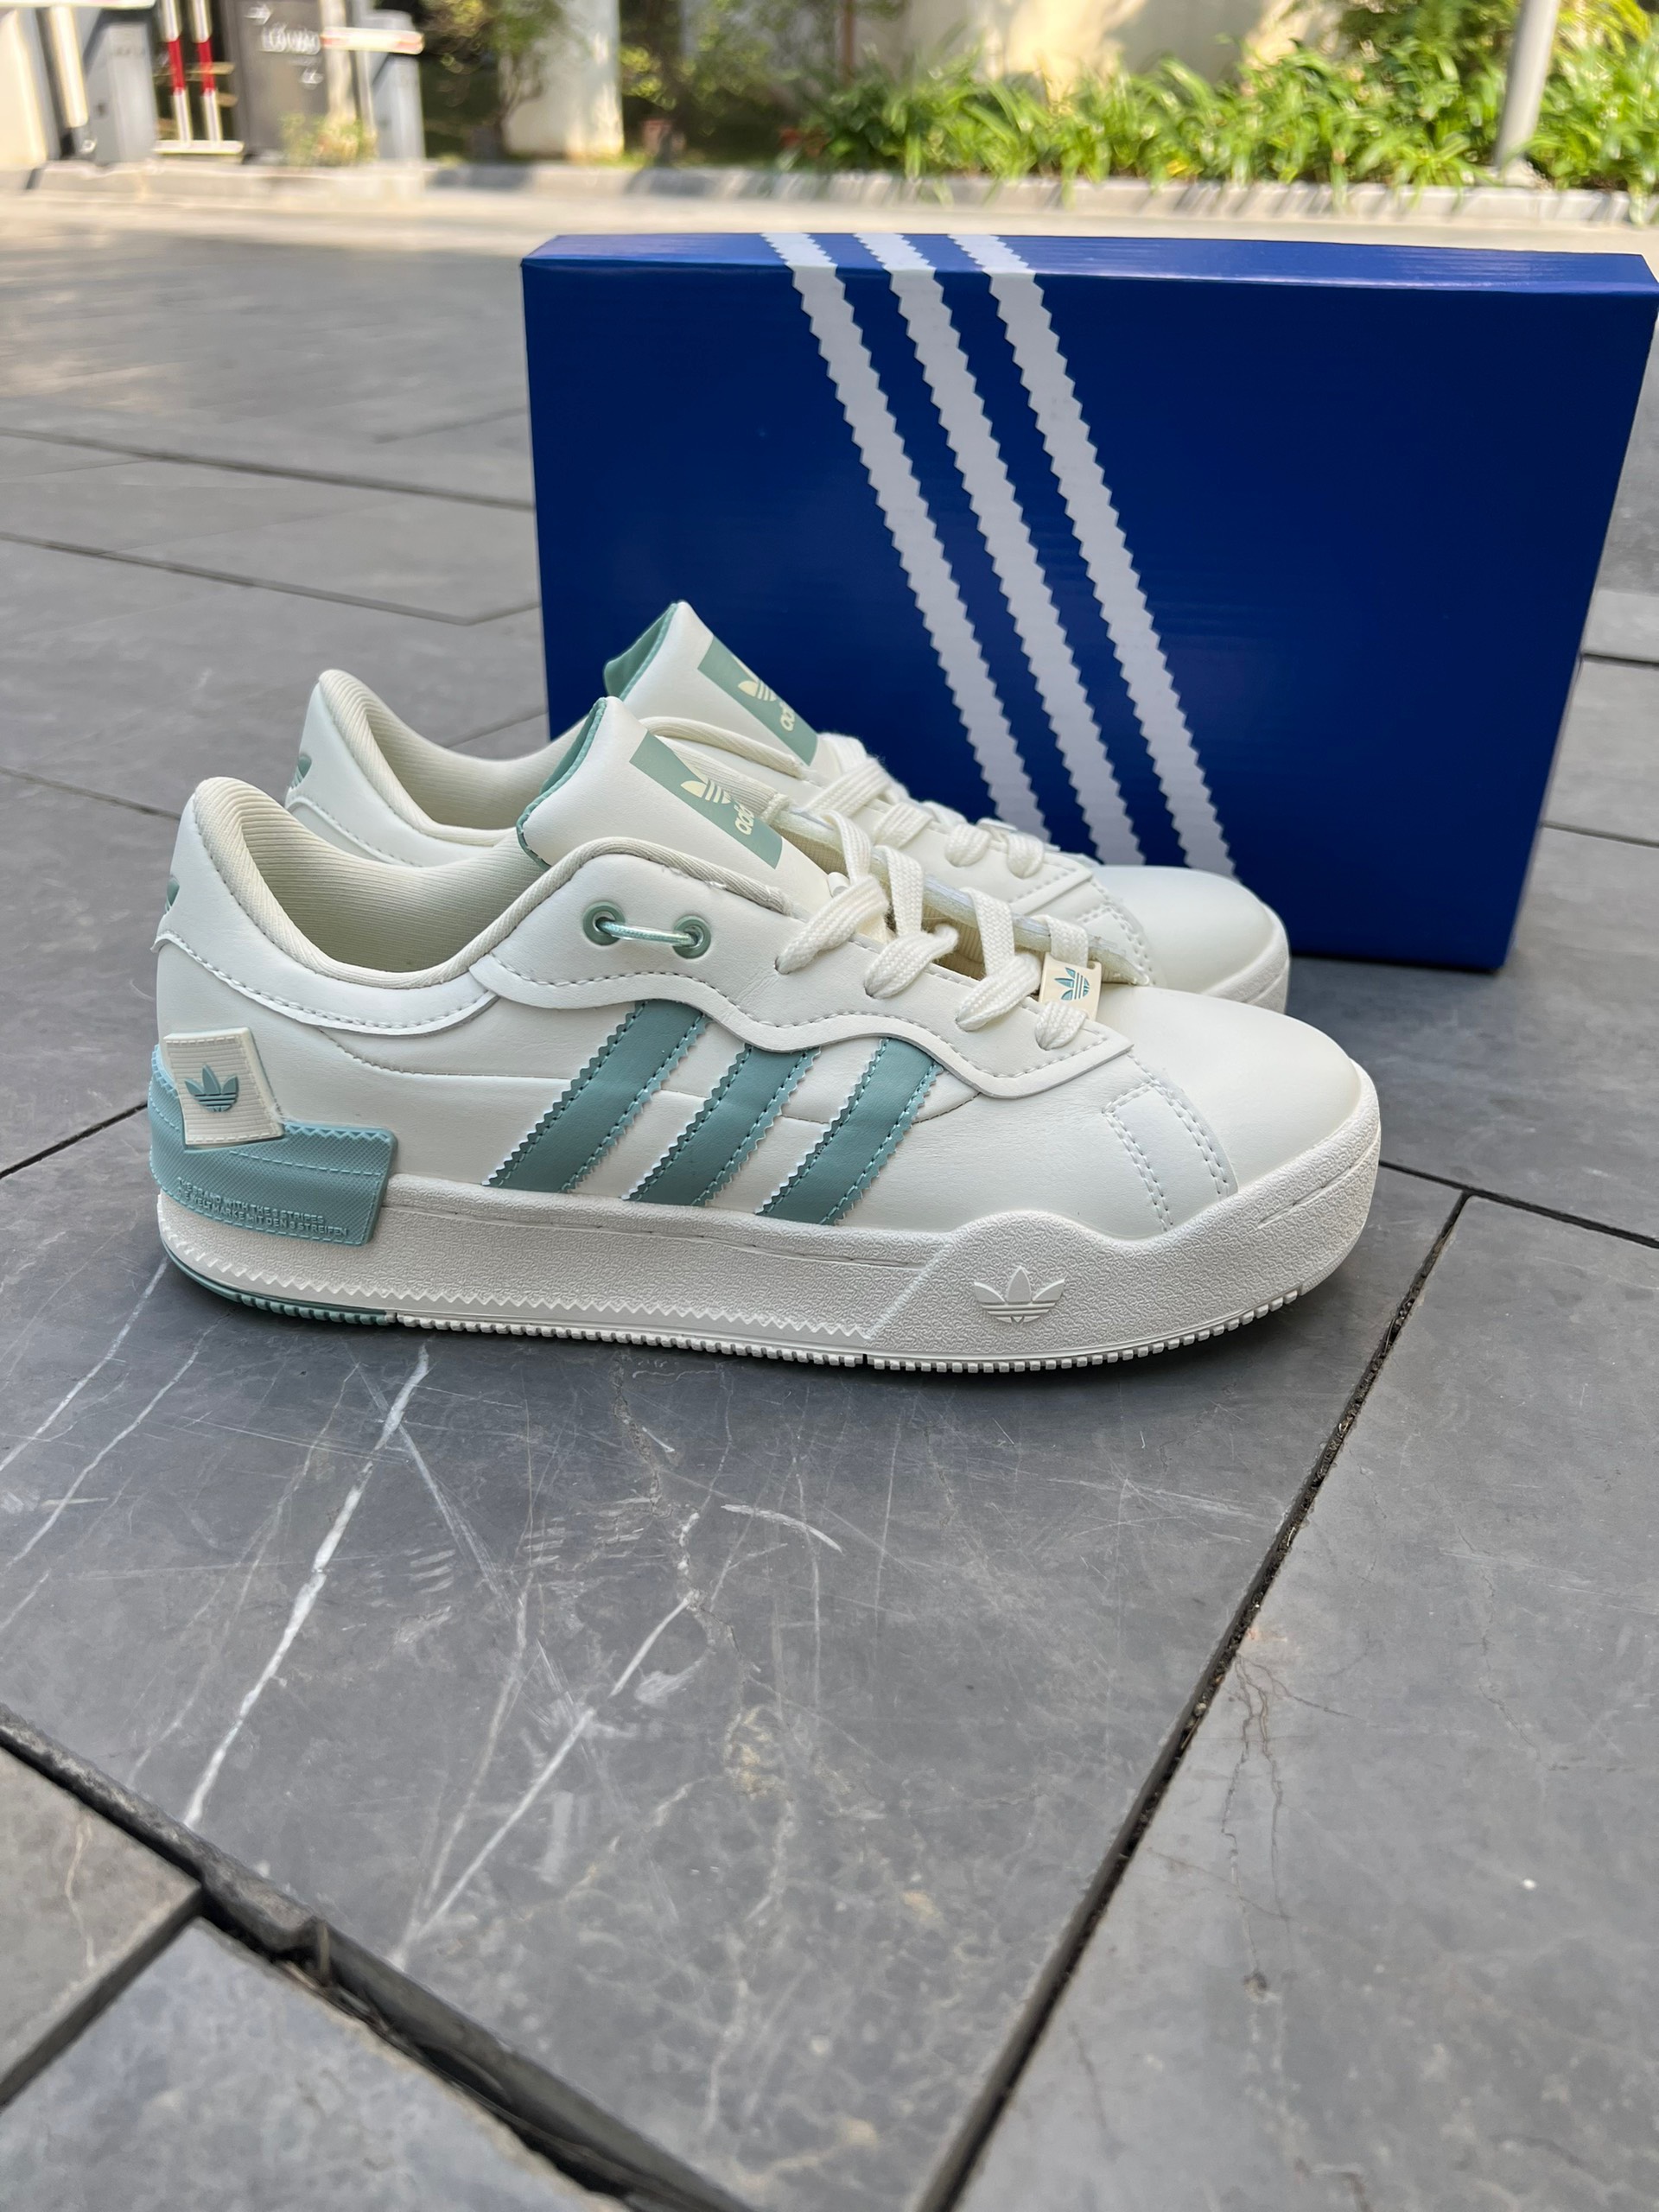 Giày Adidas Rey Galle White Dash Green Like Auth